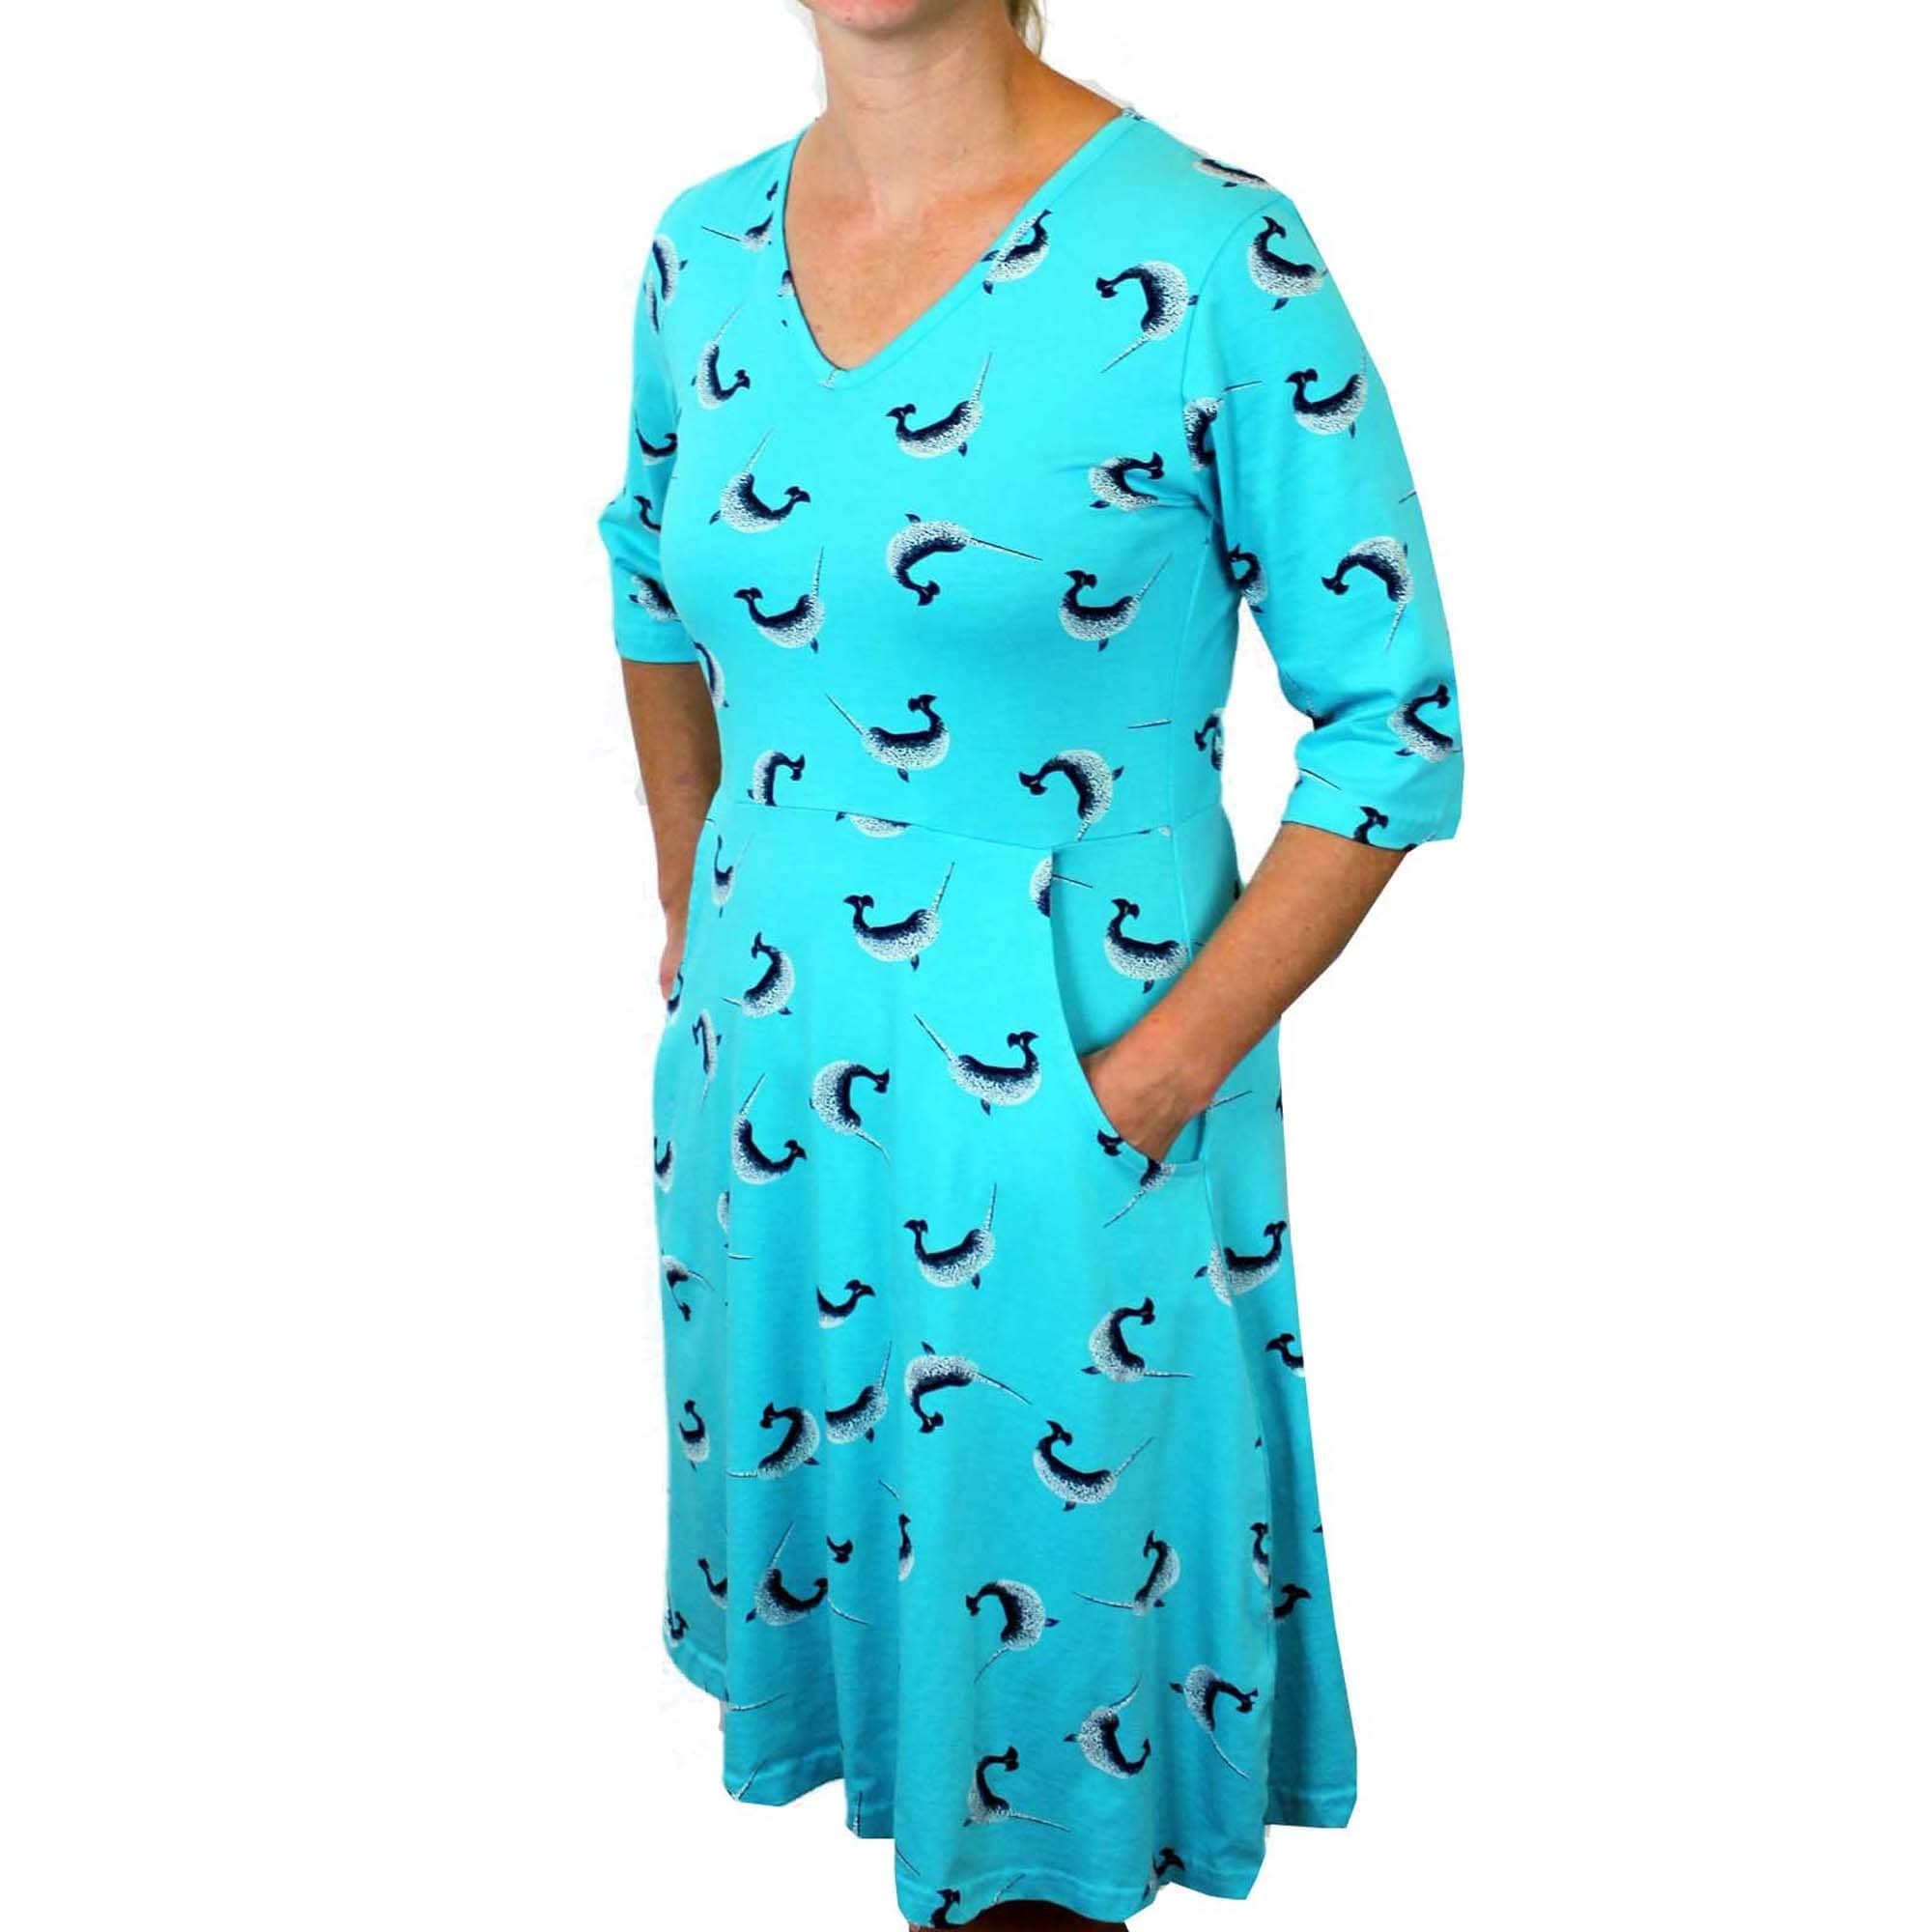 Womens Clothing, Womens Narwhals Dress with Pockets, Womens Whale Dress with Pockets, Womens Science Dress with Pockets, Womens STEM Dress with Pockets, Womens Science Dress with Pockets, Womens Marine Biology Dress with Pockets, Womens Oceanography Dress with Pockets, Womens Ocean Animals Dress with Pockets, Womens Sea Creatures Dress with Pockets, Womens Unicorn of the Sea Dress with Pockets, Womens Ocean Dress with Pockets - SVAHA USA